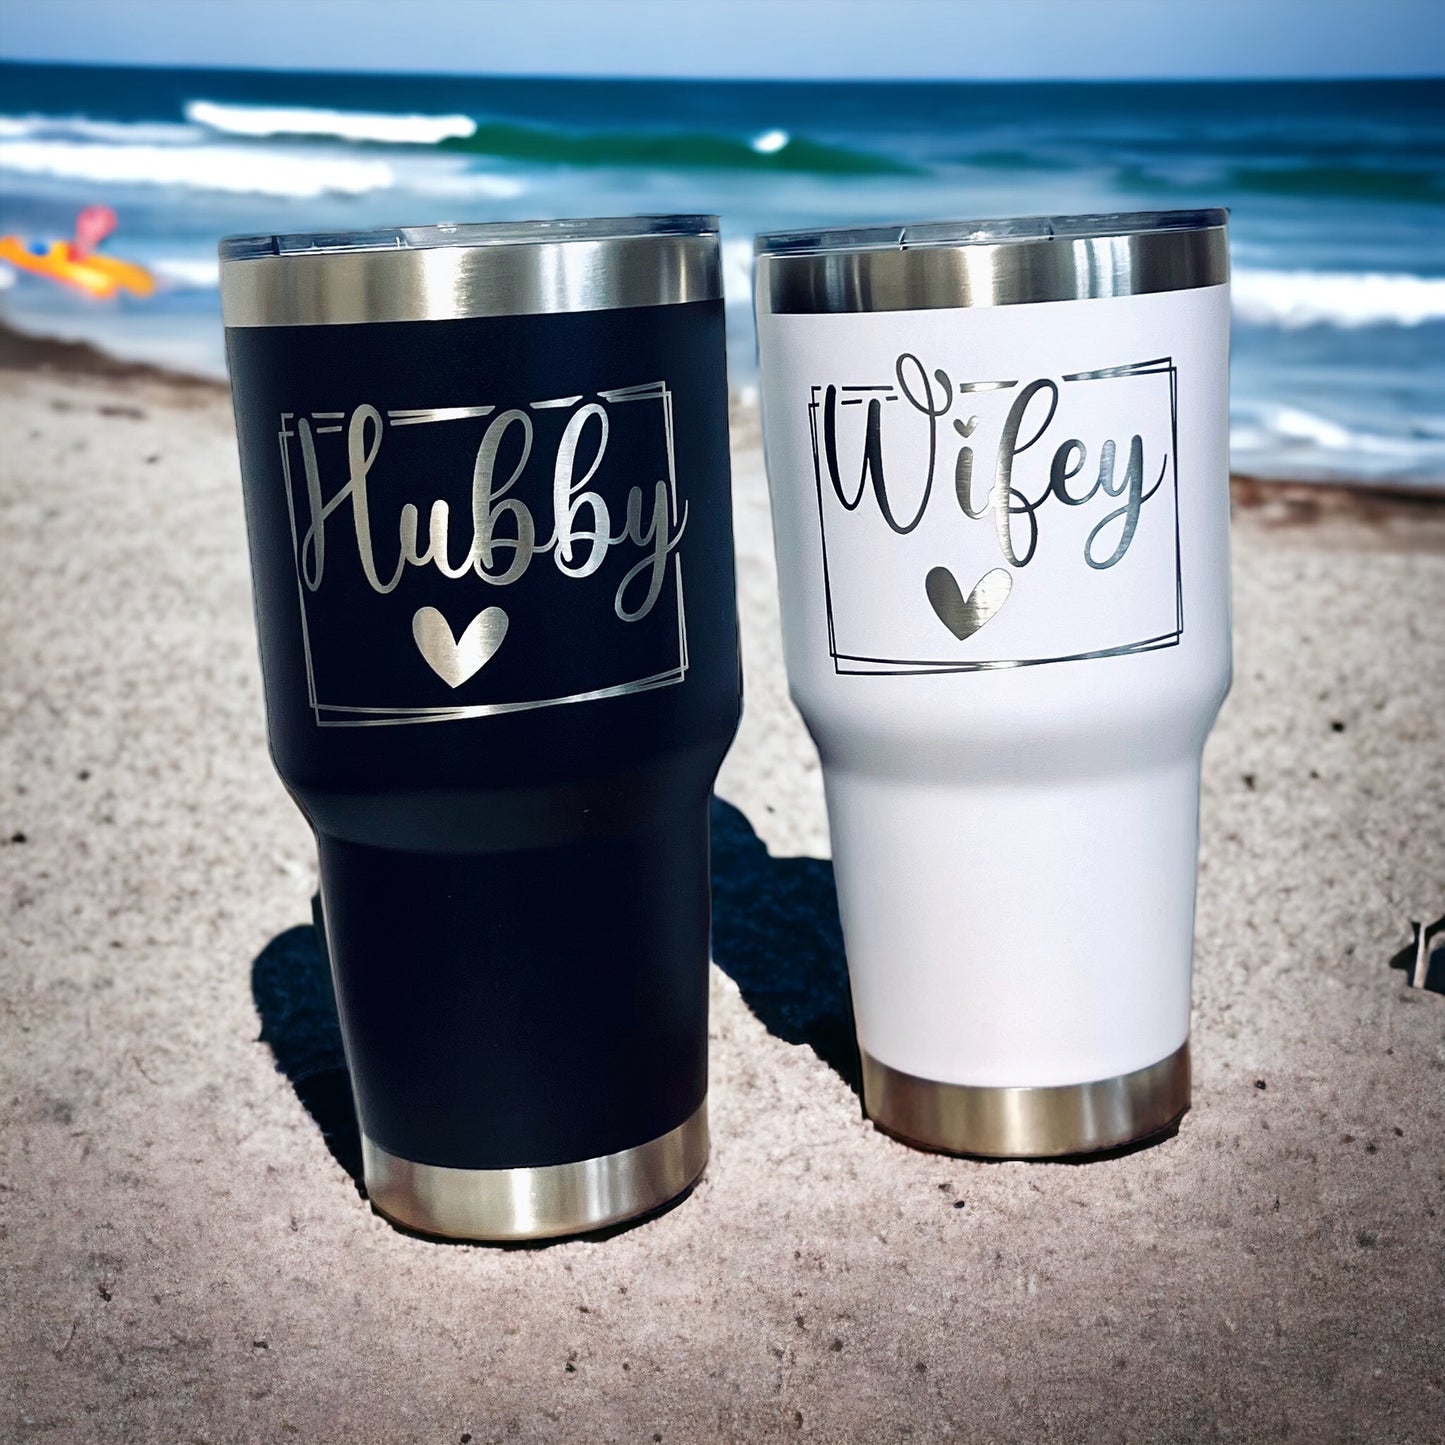 Hubby and Wifey 30 ounce tumbler set